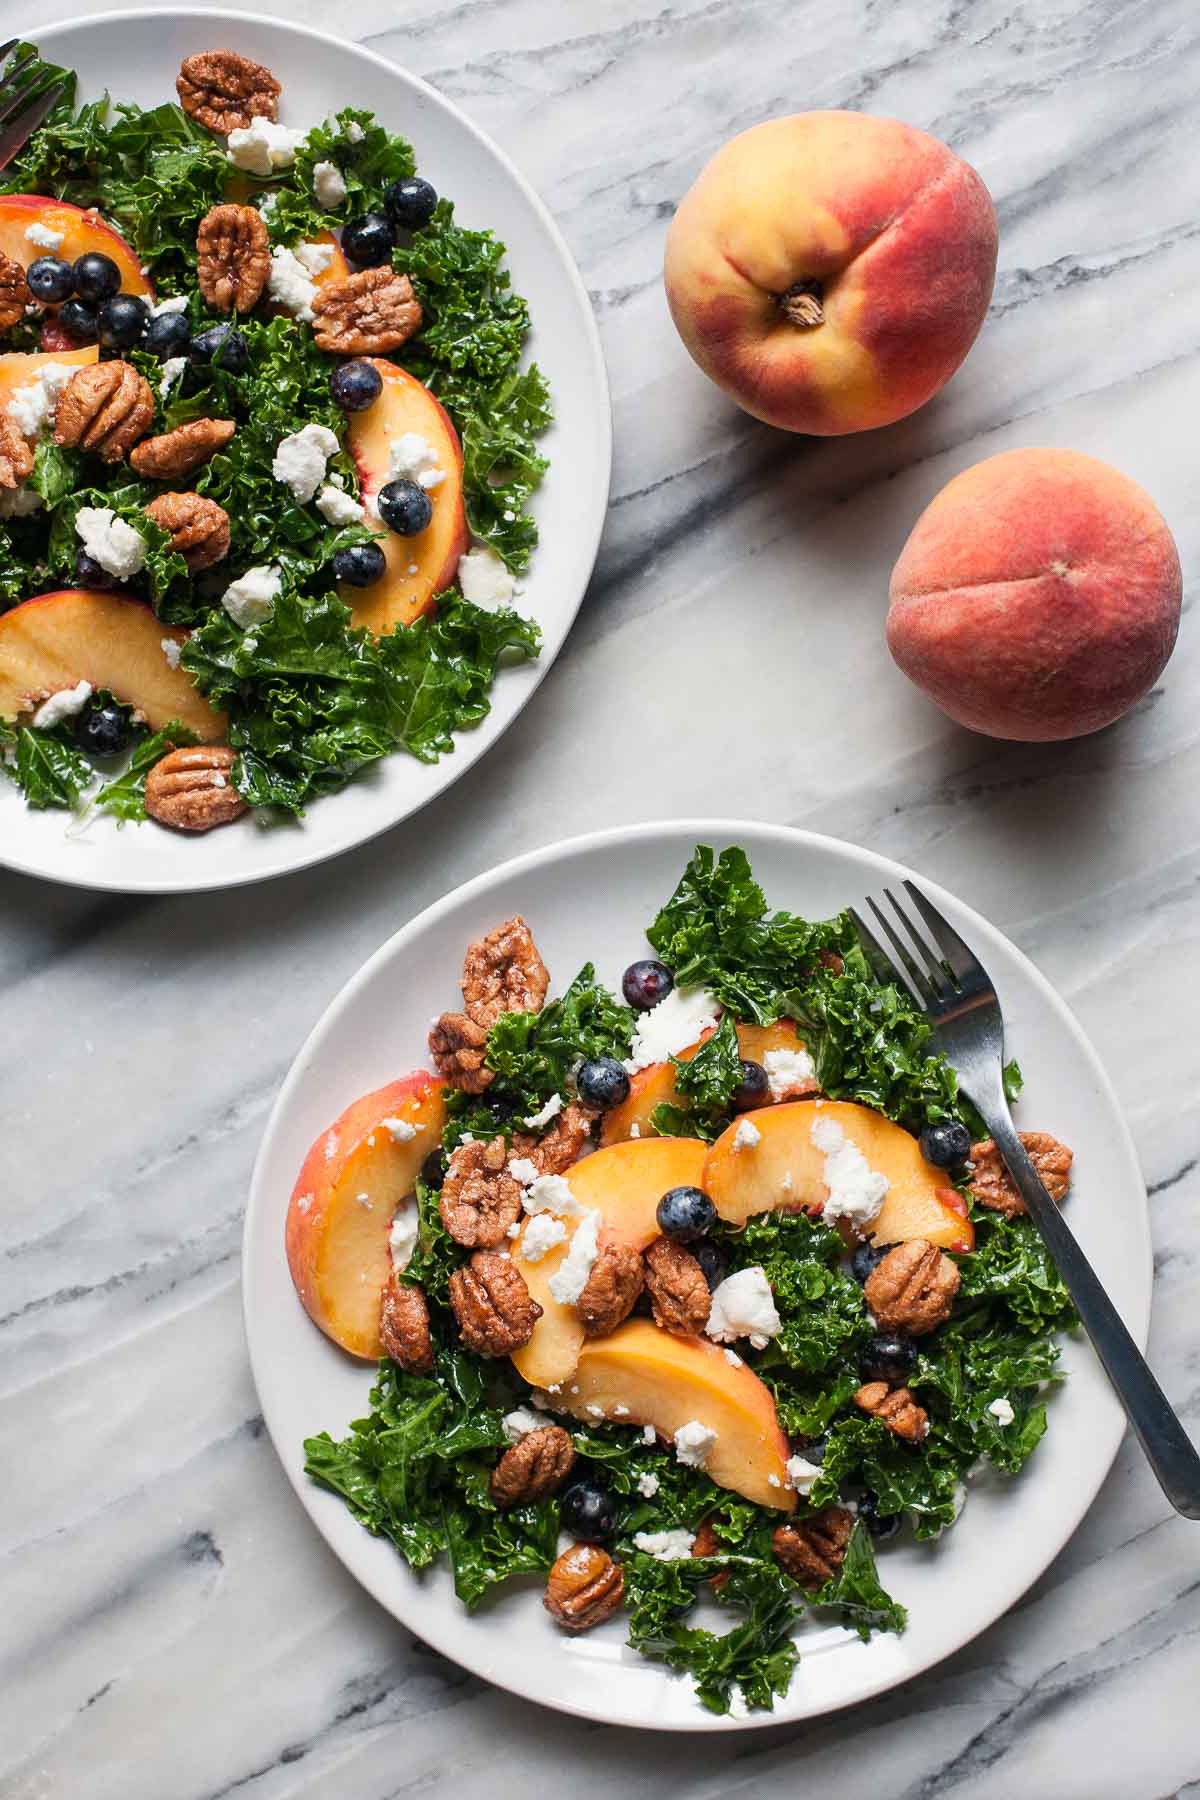 Summer Kale Salad with Peaches and Candied Pecans